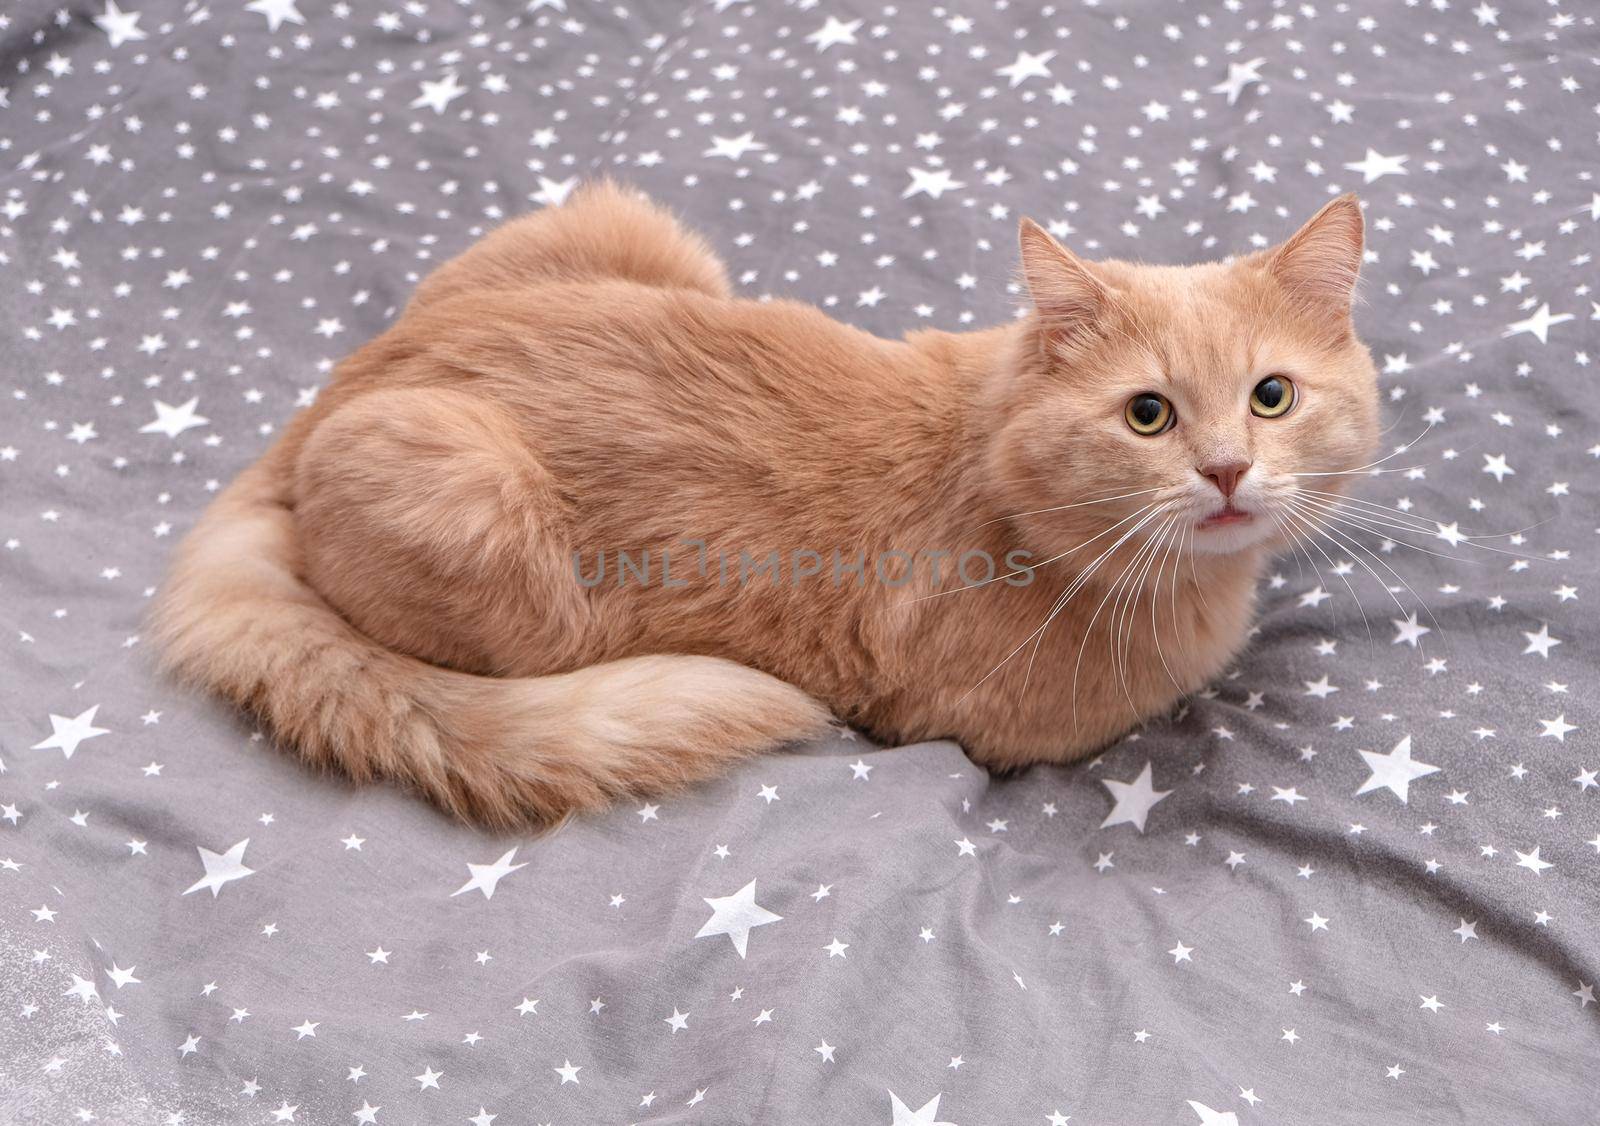 Fluffy ginger cat on a gray bedspread. Long-haired cat in the crib. Molting cats